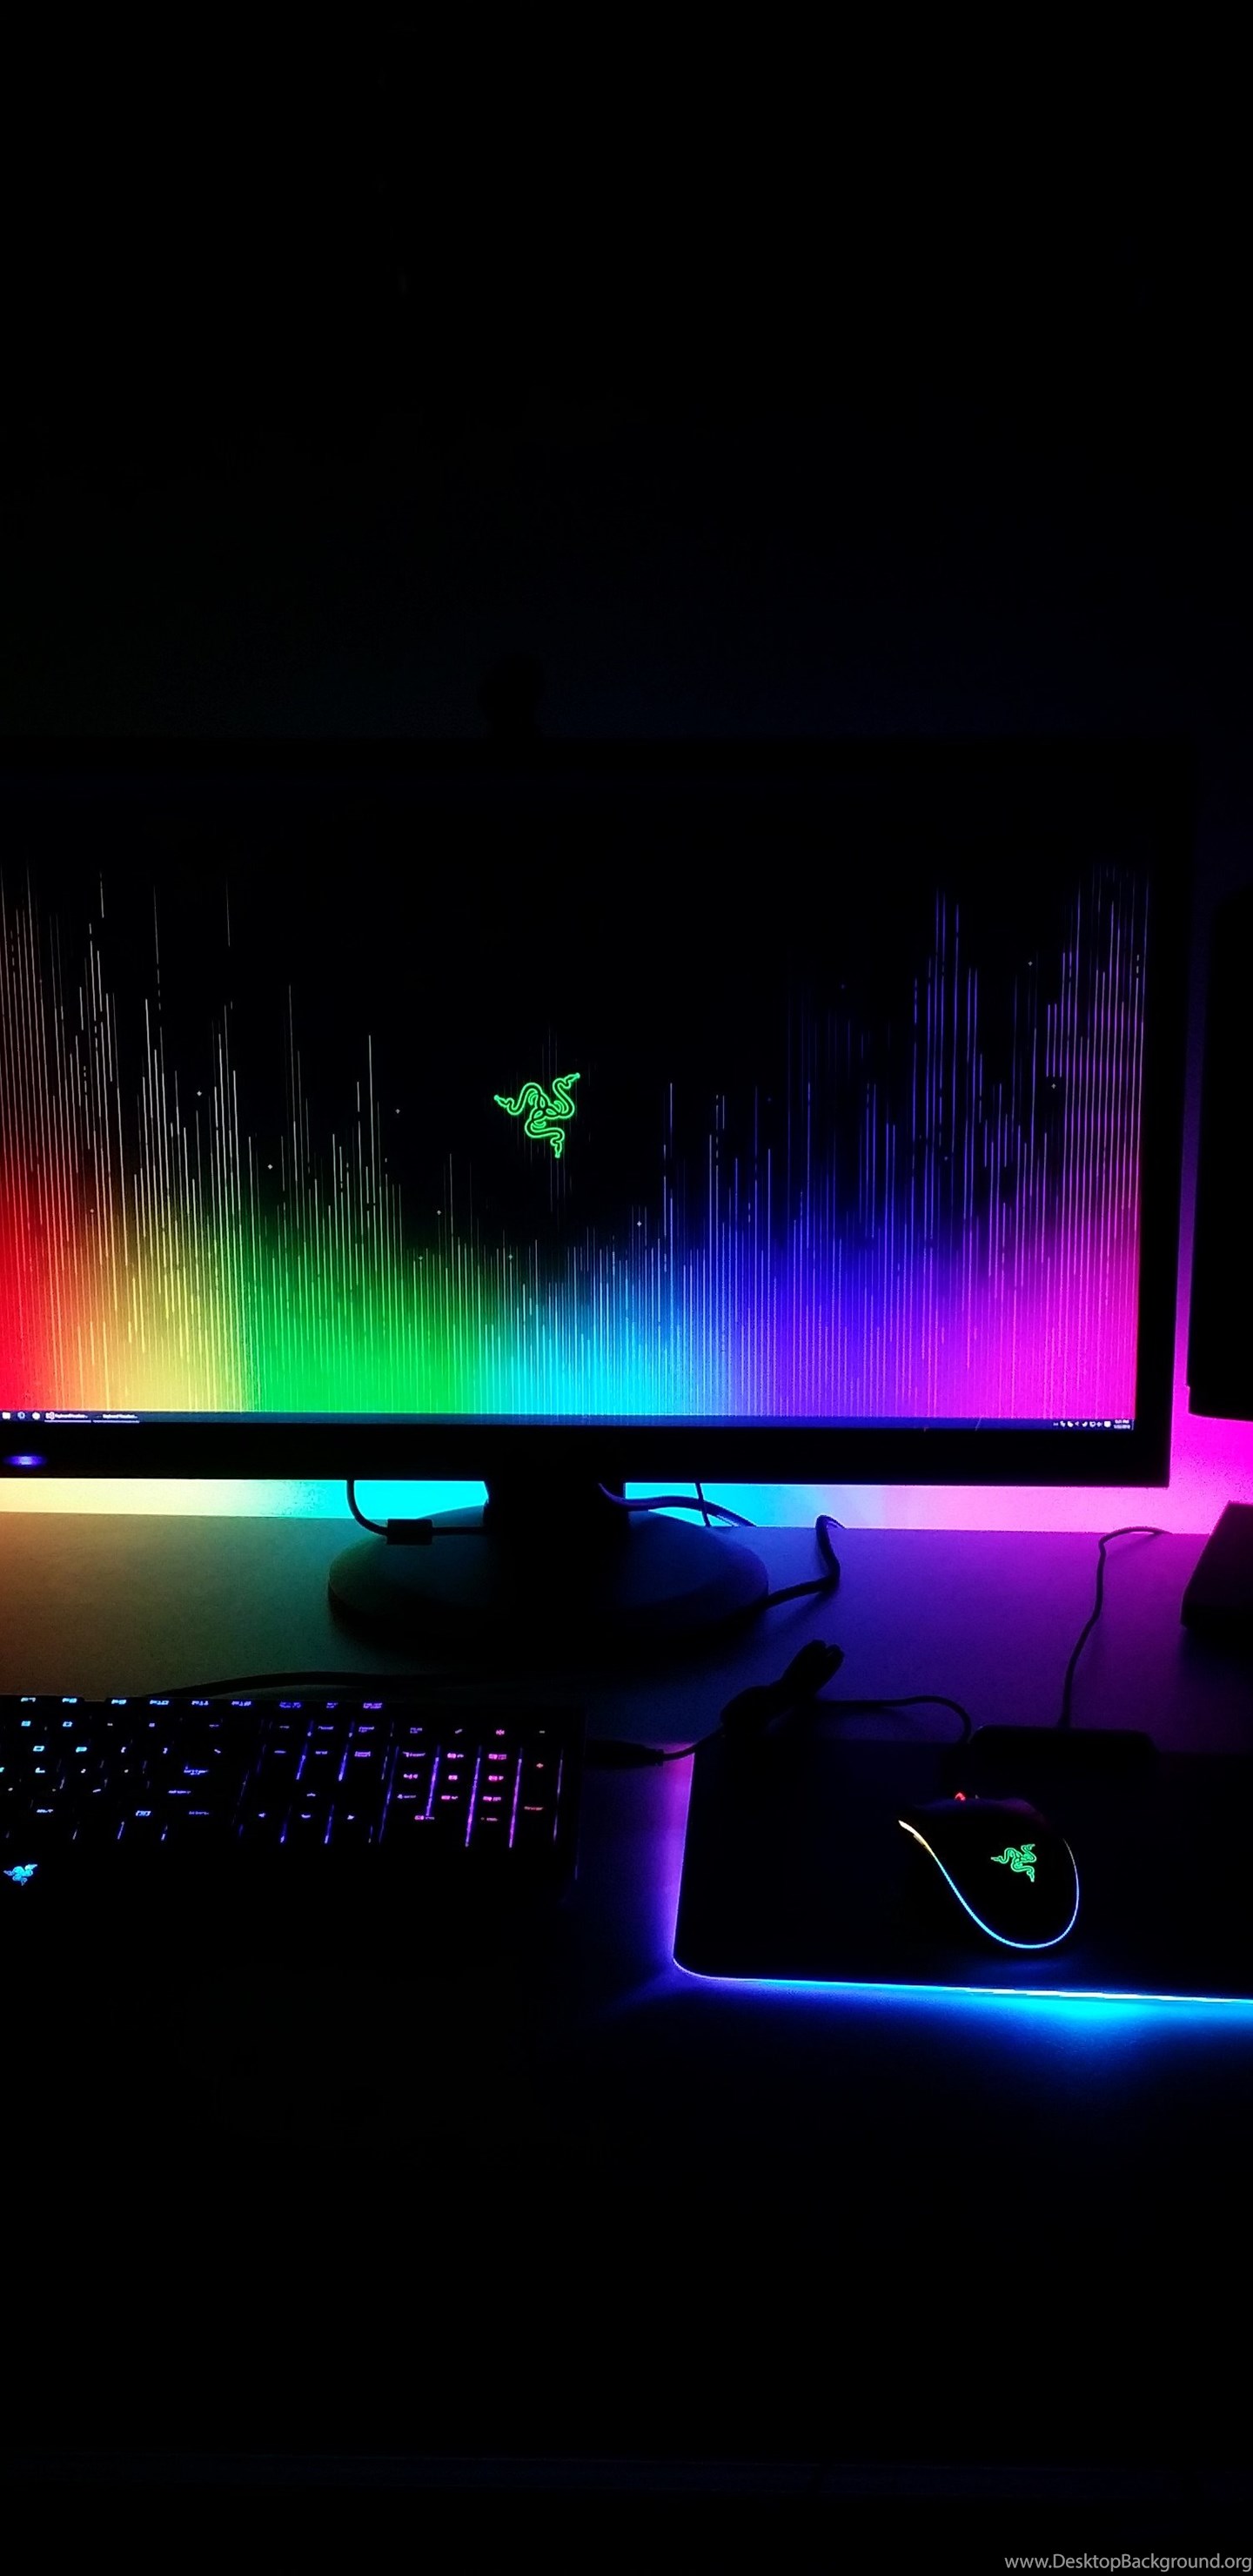 Here's My Chroma Setup To Go Along With The New Wallpaper!, Razer Desktop Background